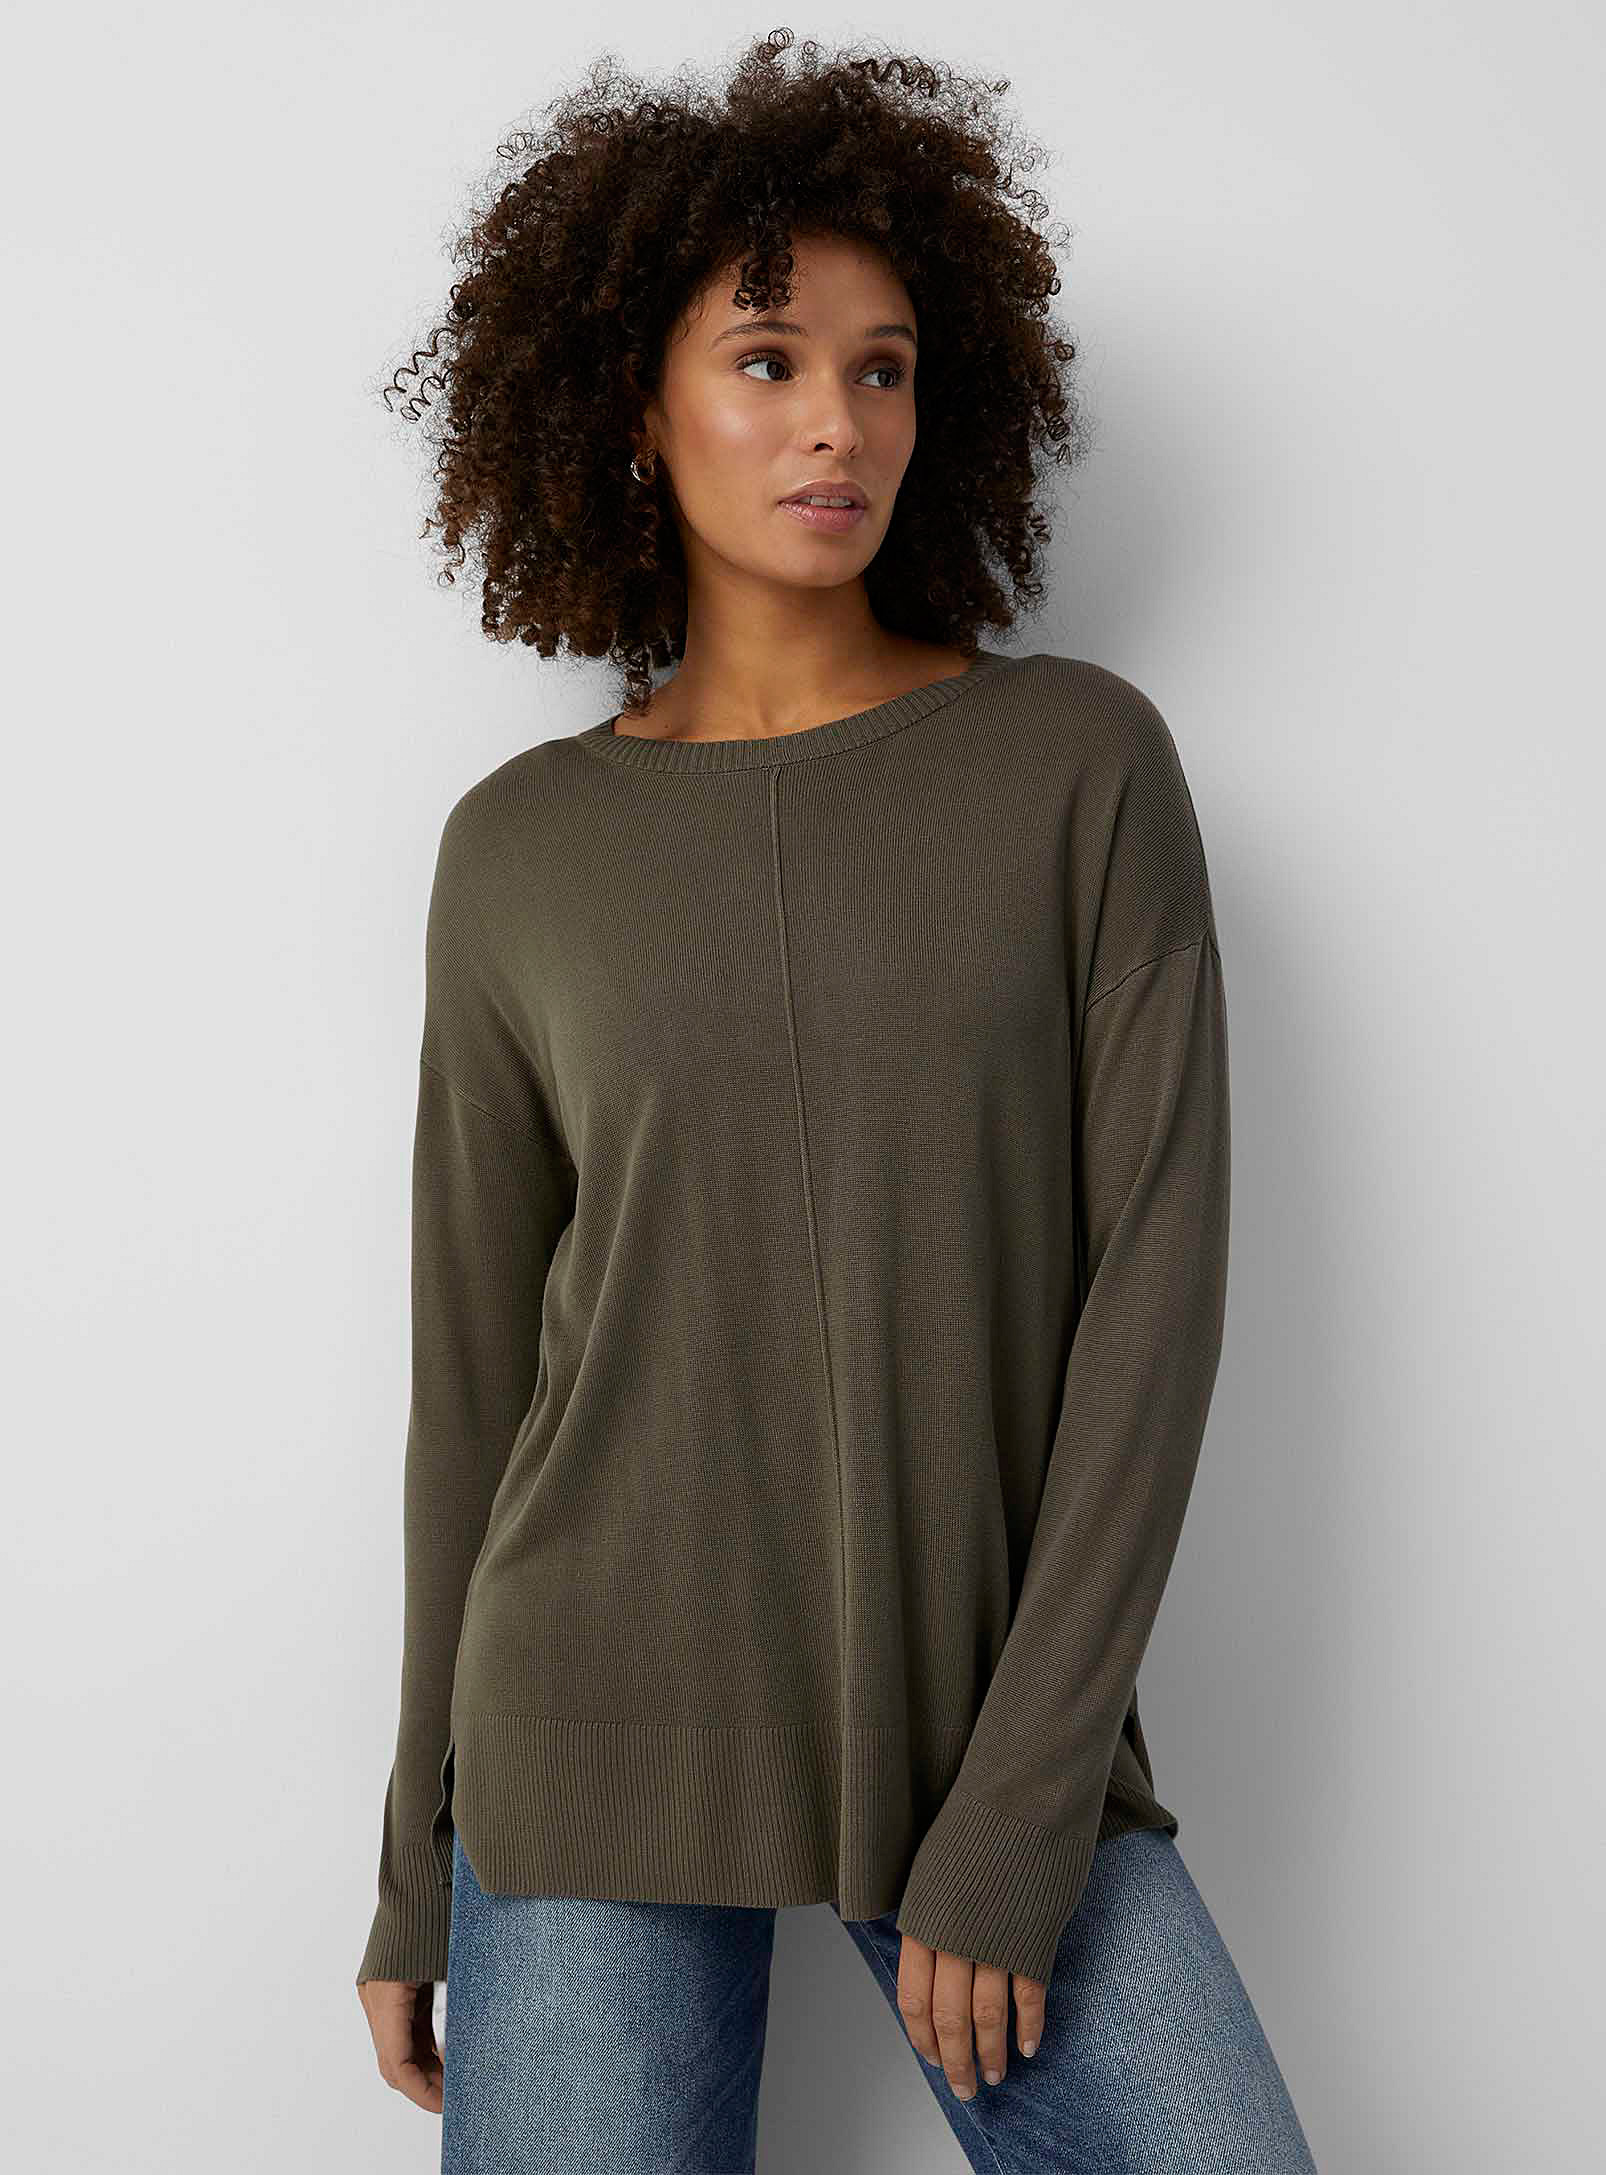 Contemporaine Embossed Seam Flowy Sweater In Mossy Green